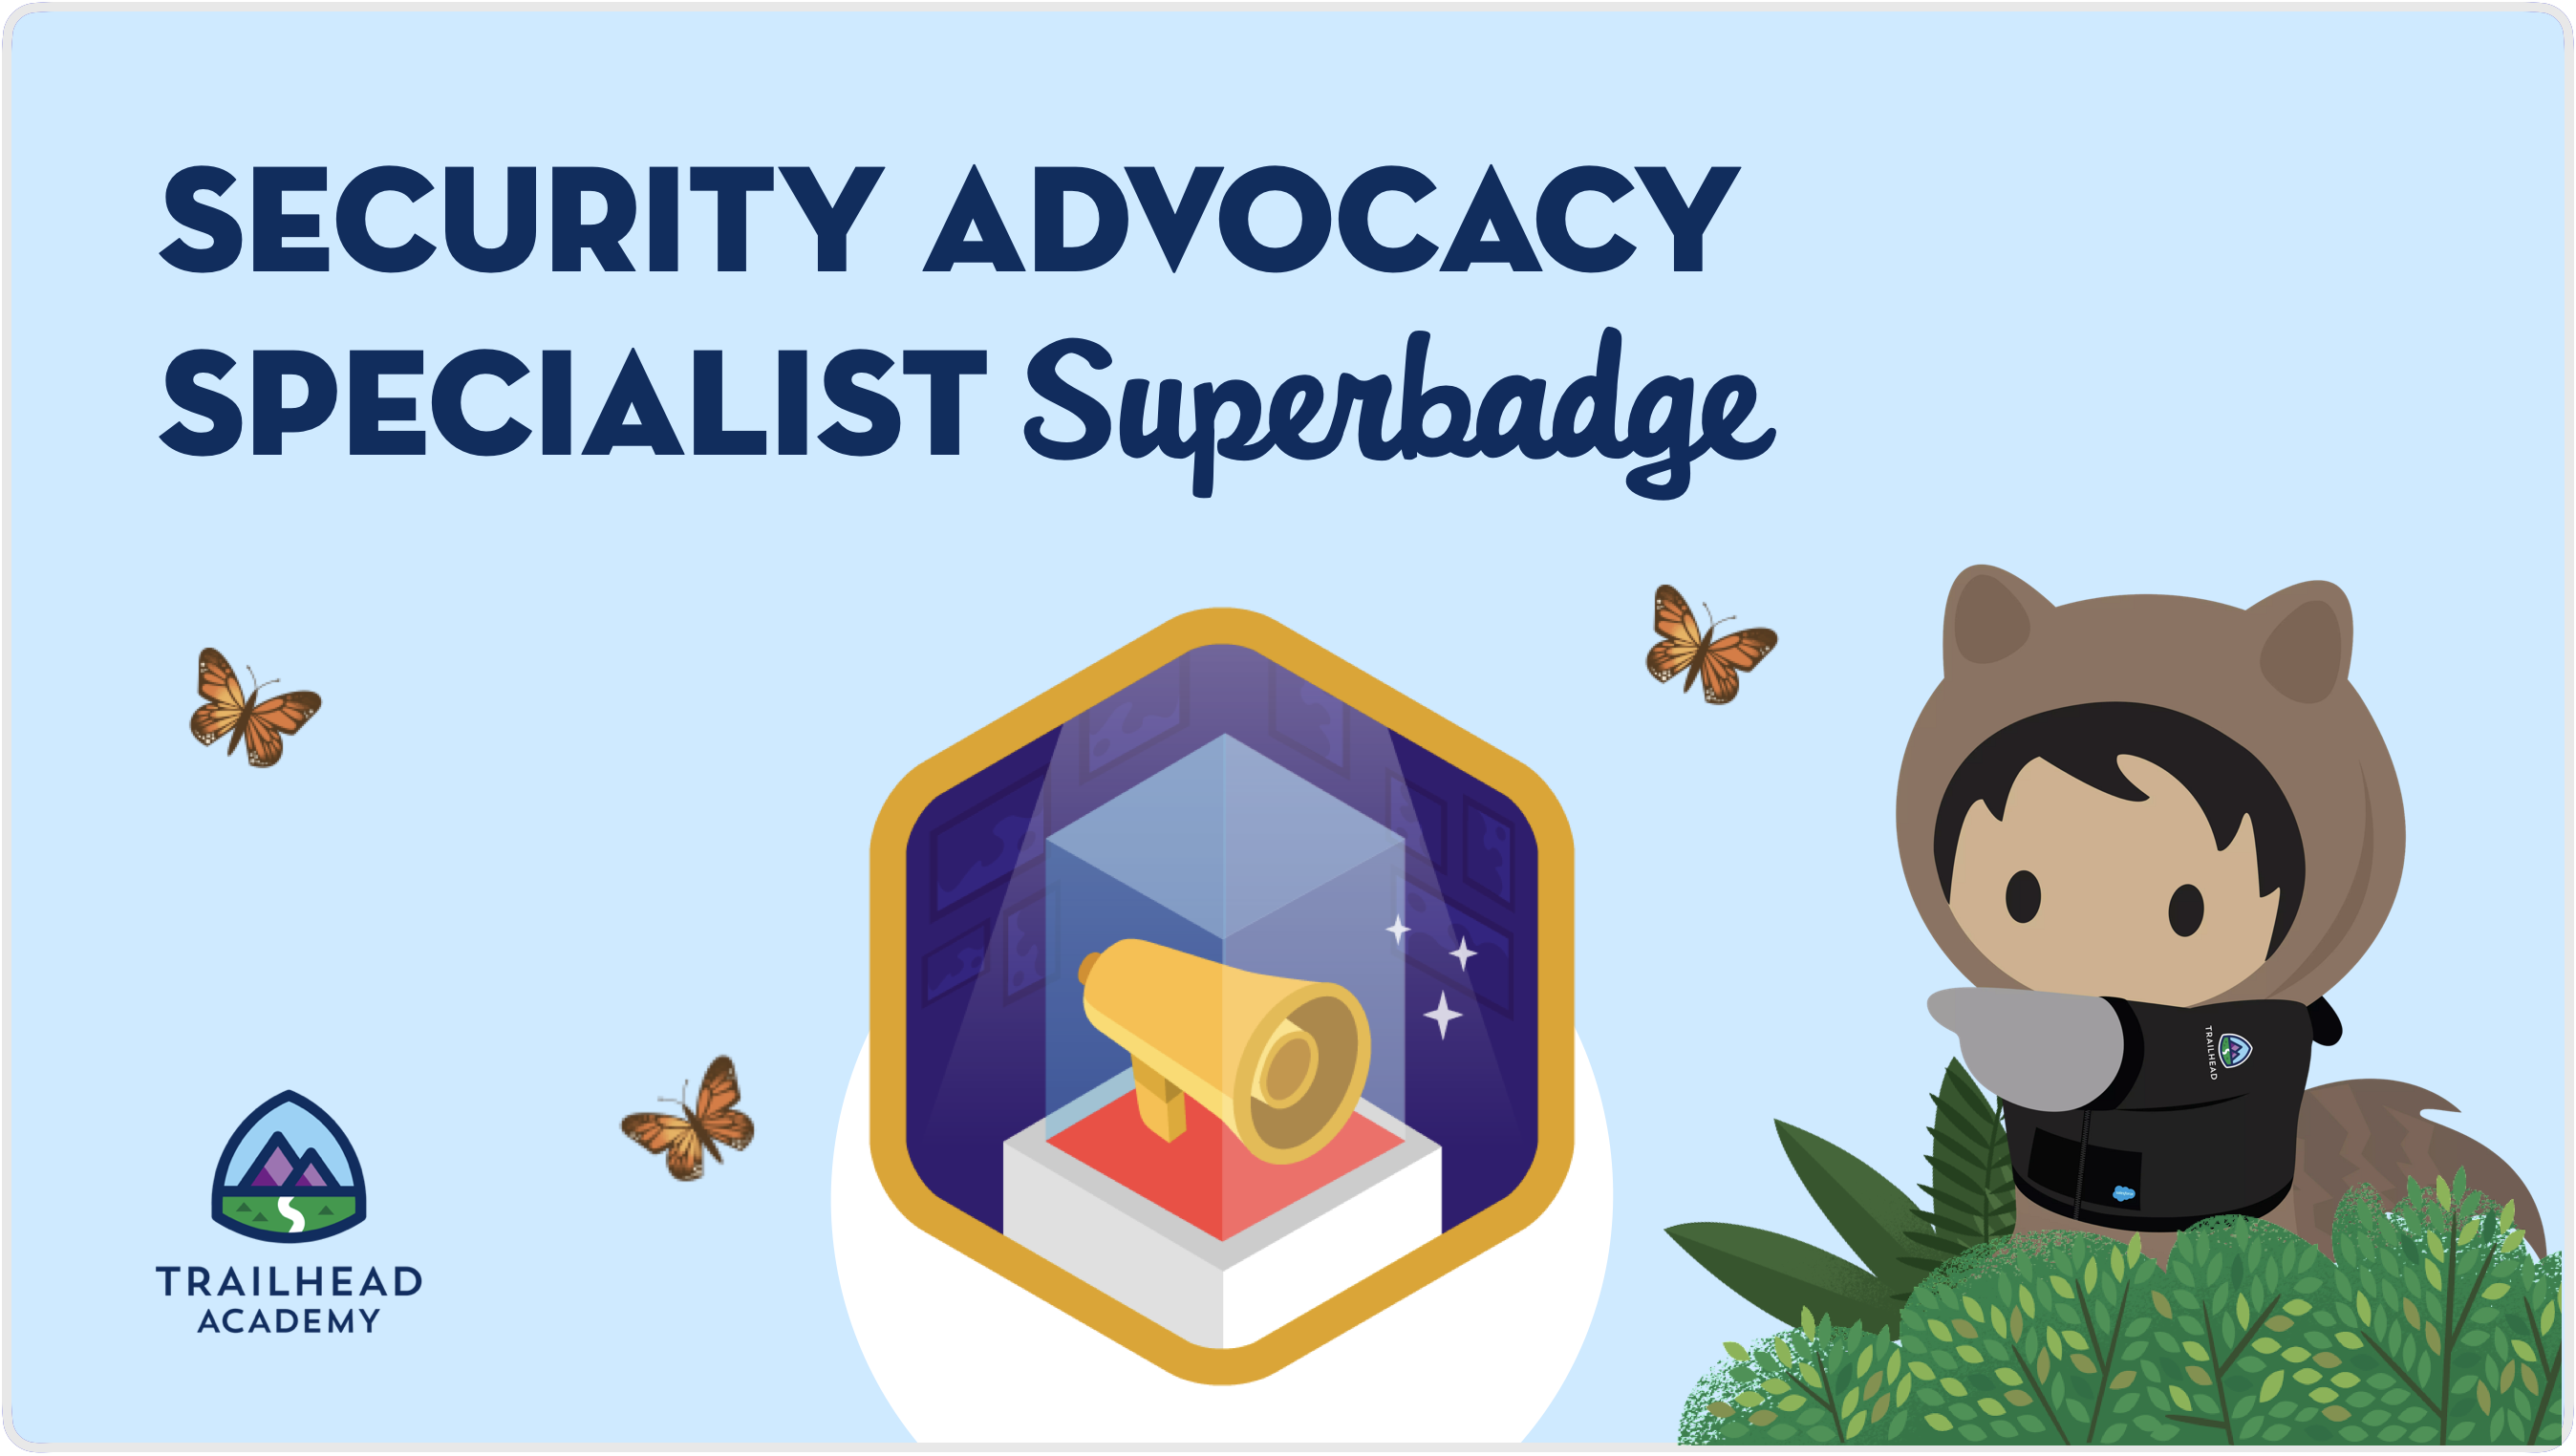 Introducing: The Security Advocacy Specialist Superbadge